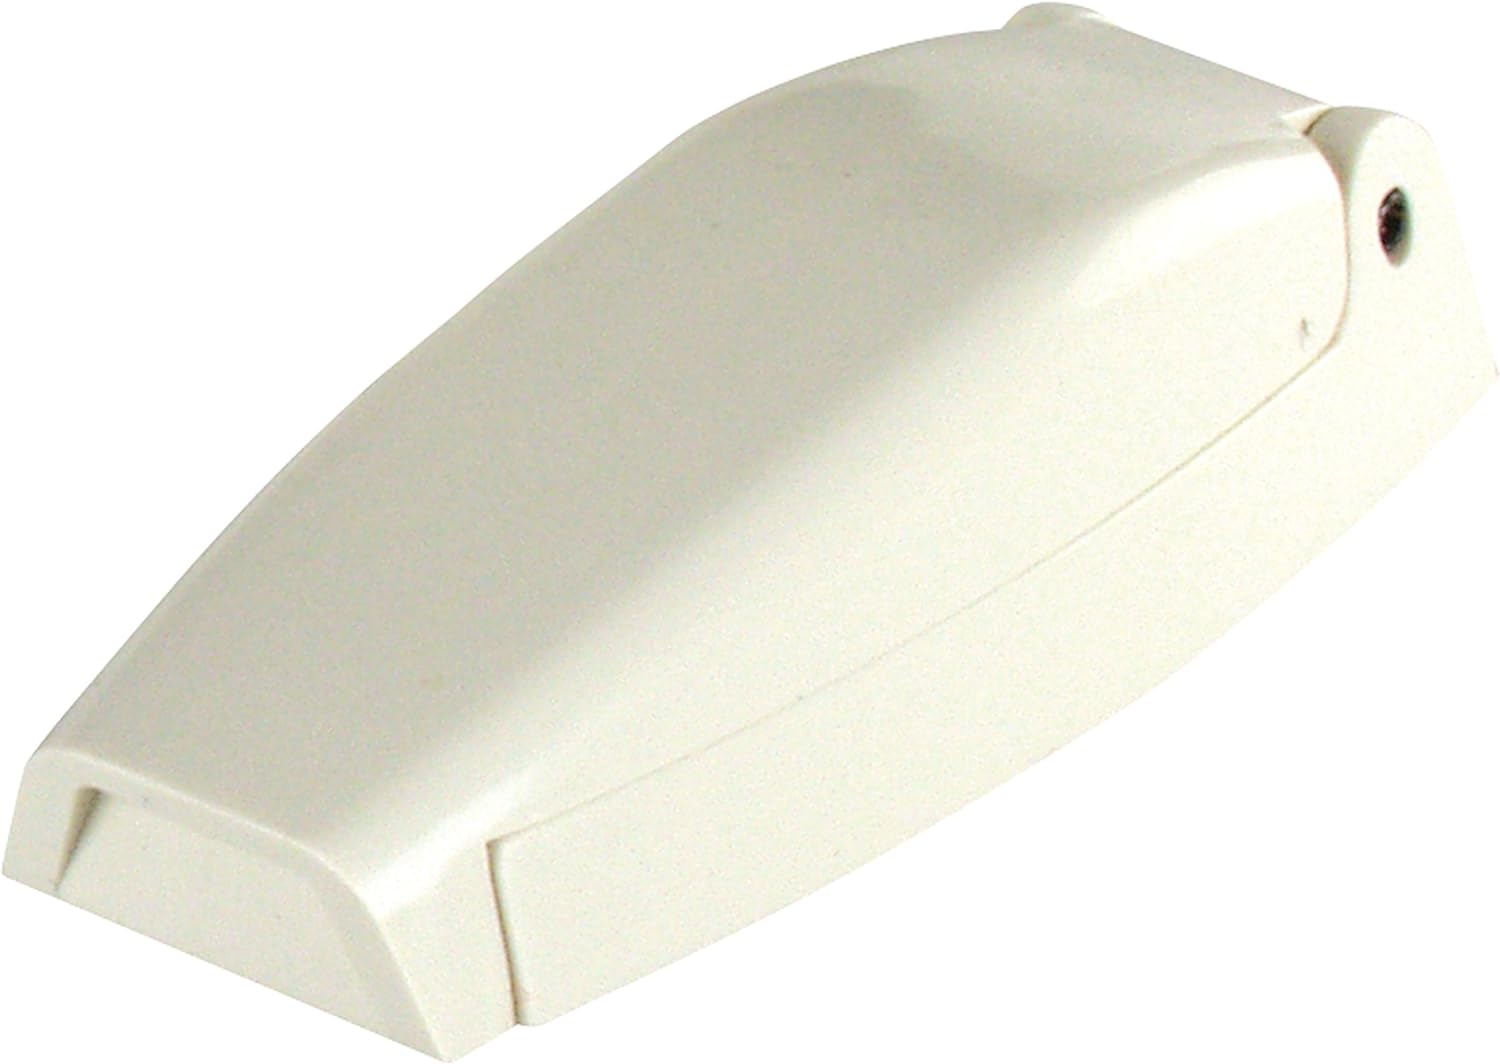 JR Products 10254 Baggage Door Catch - Colonial White - 2 Pack